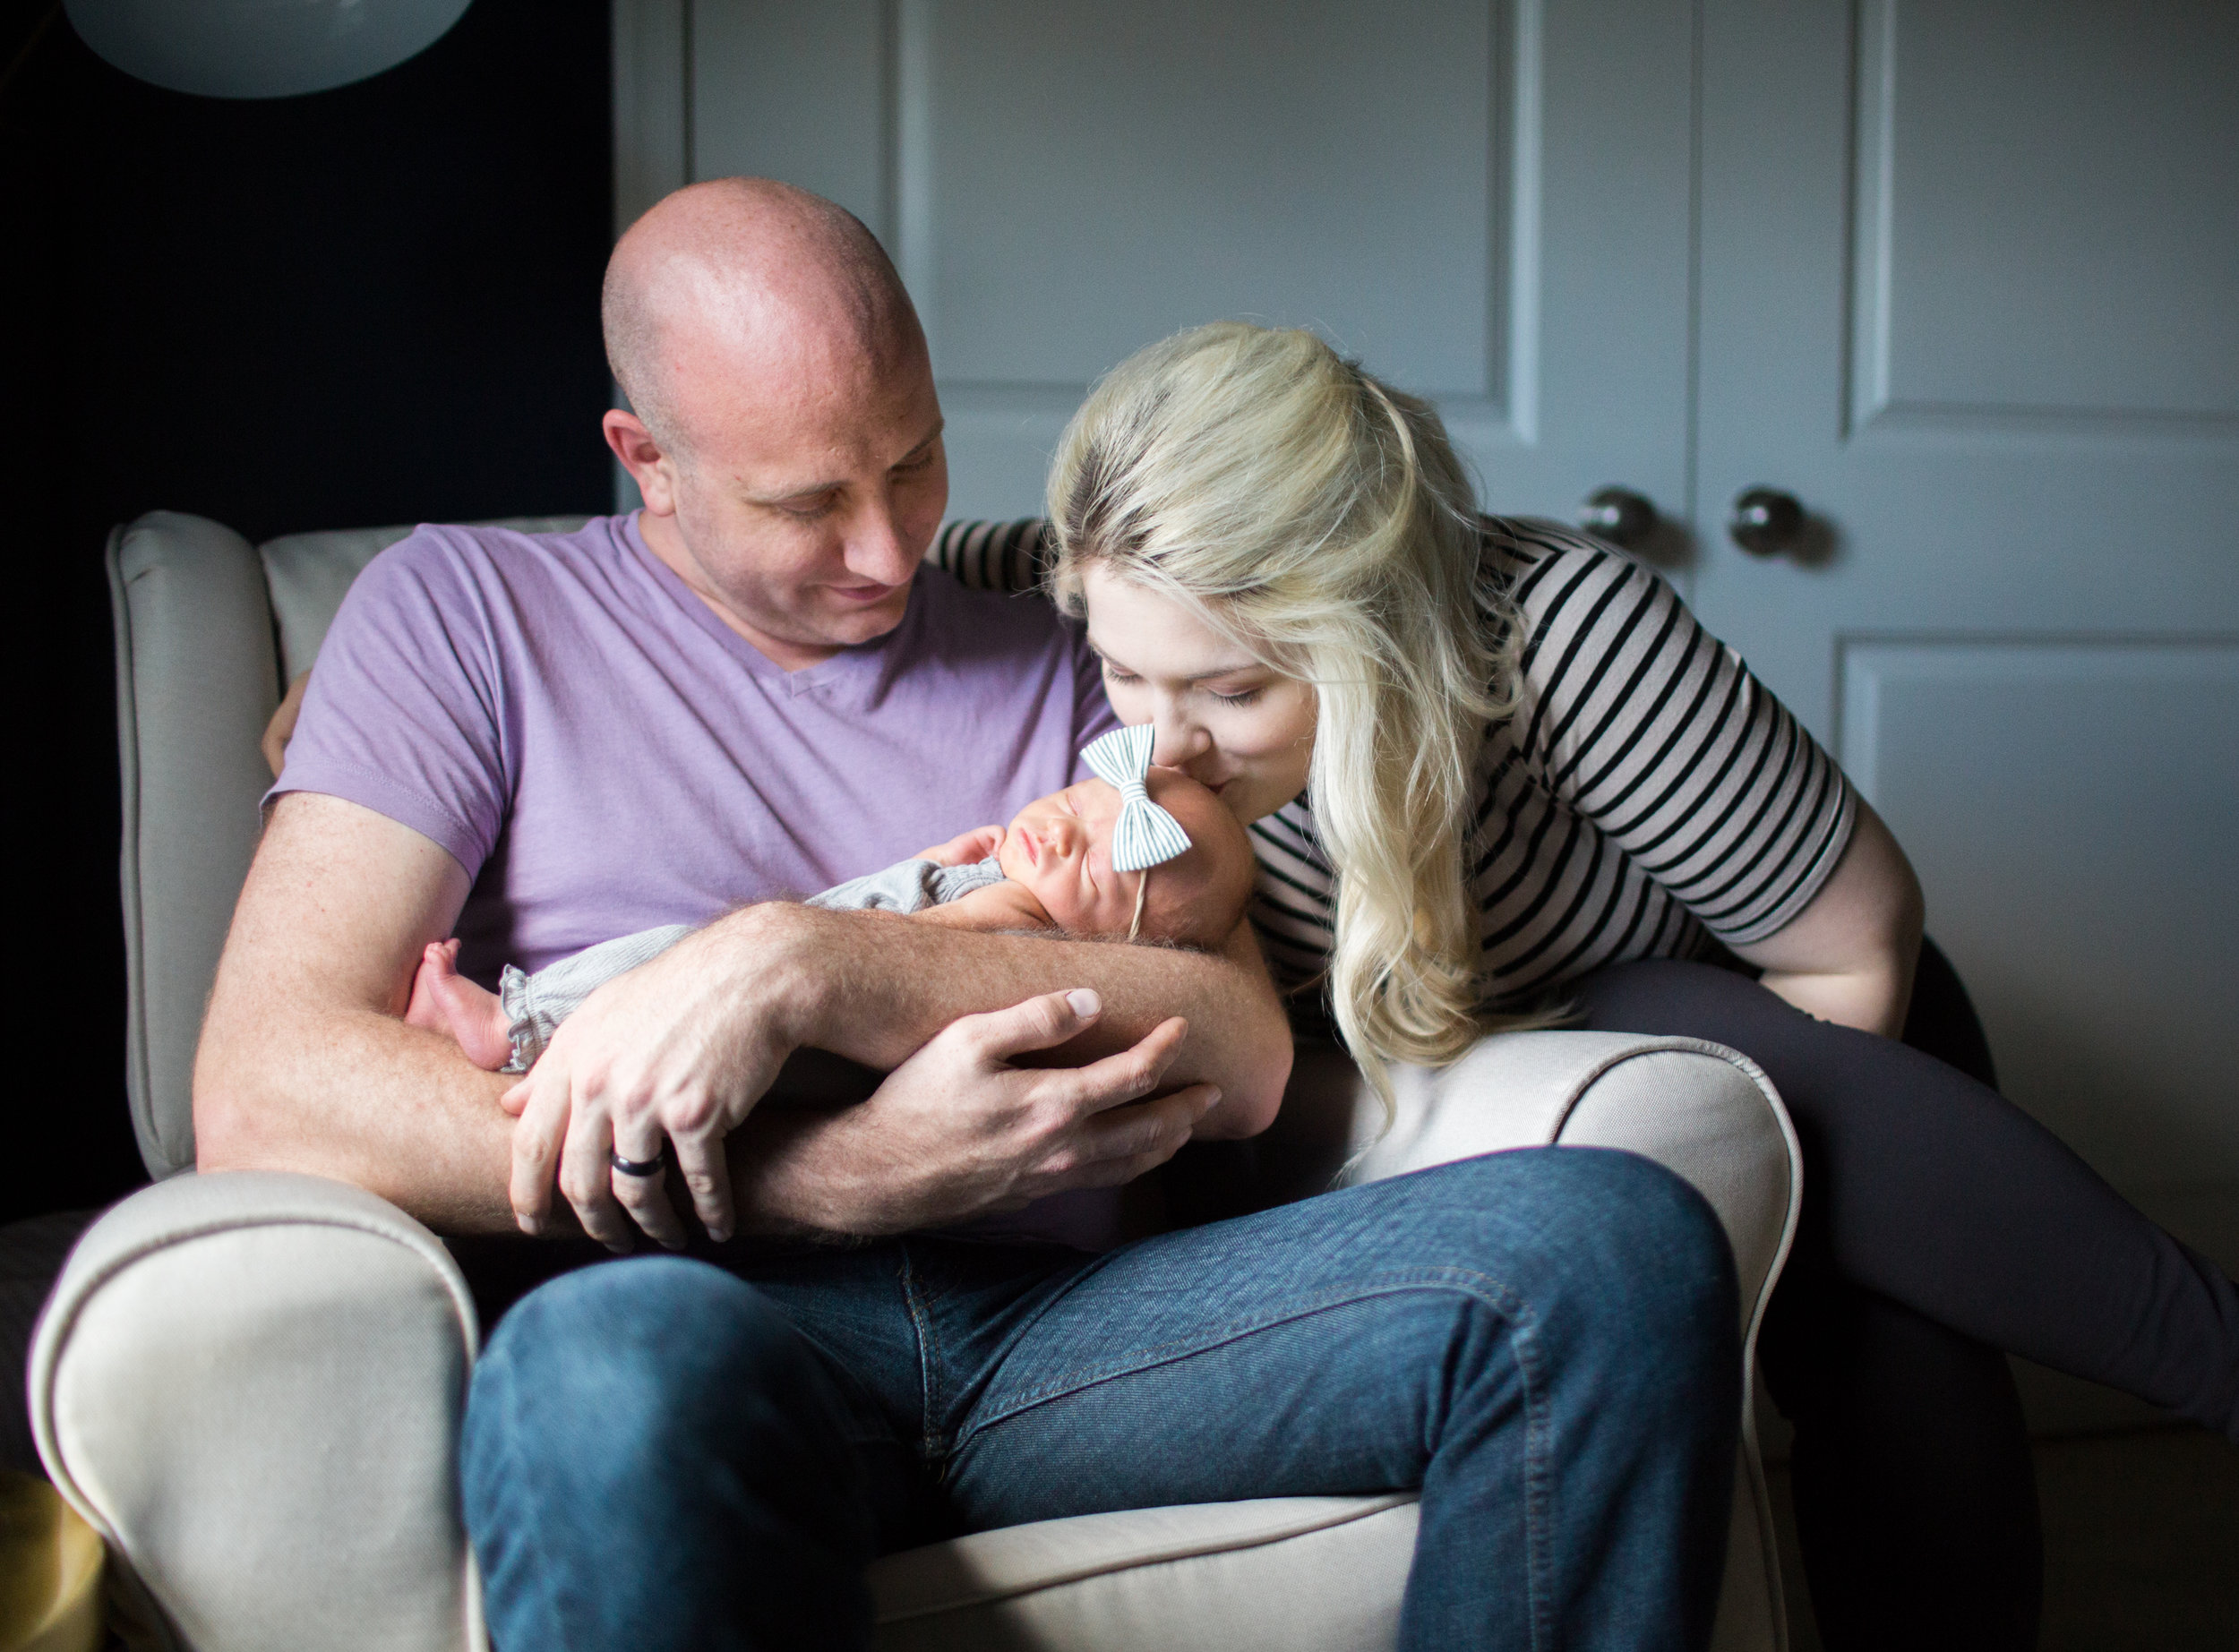 bethany-grace-photography-lifestyle-sessions-silver-spring-maryland-virginia-dc-family-newborn-17.JPG